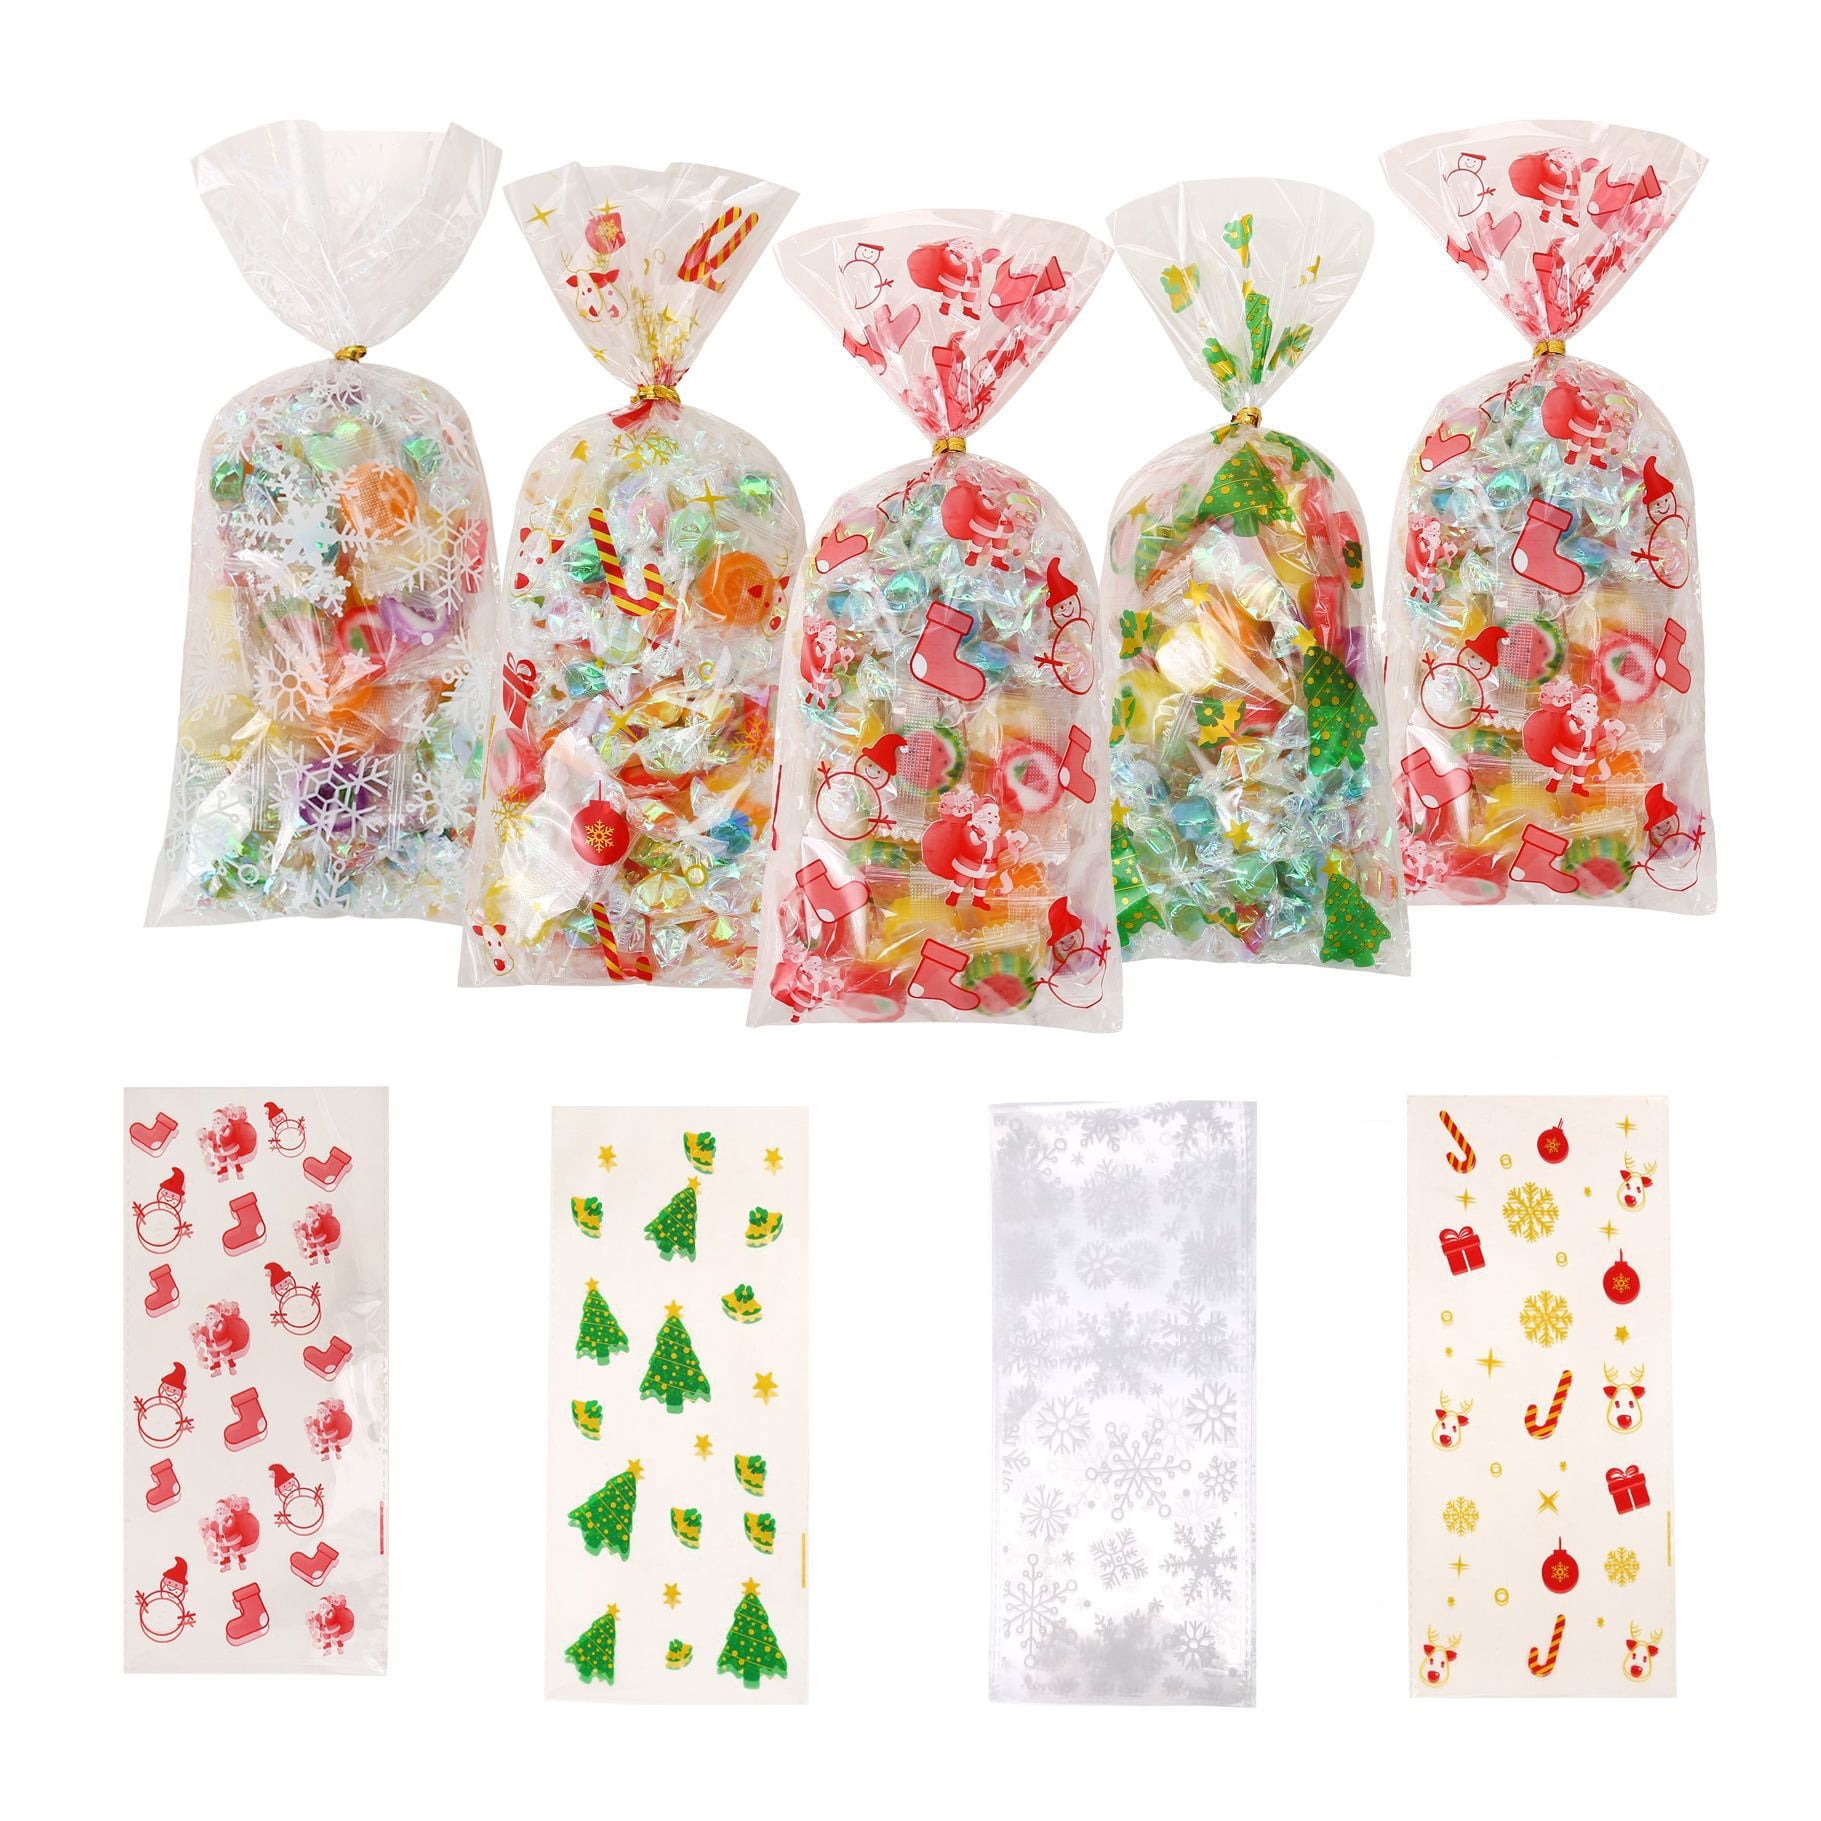 4" x 6" CELLO BAGS & SILVER TIES 50 CAKE POP WRAP KIT/ FAVOUR BAGS/ SWEET BAGS 